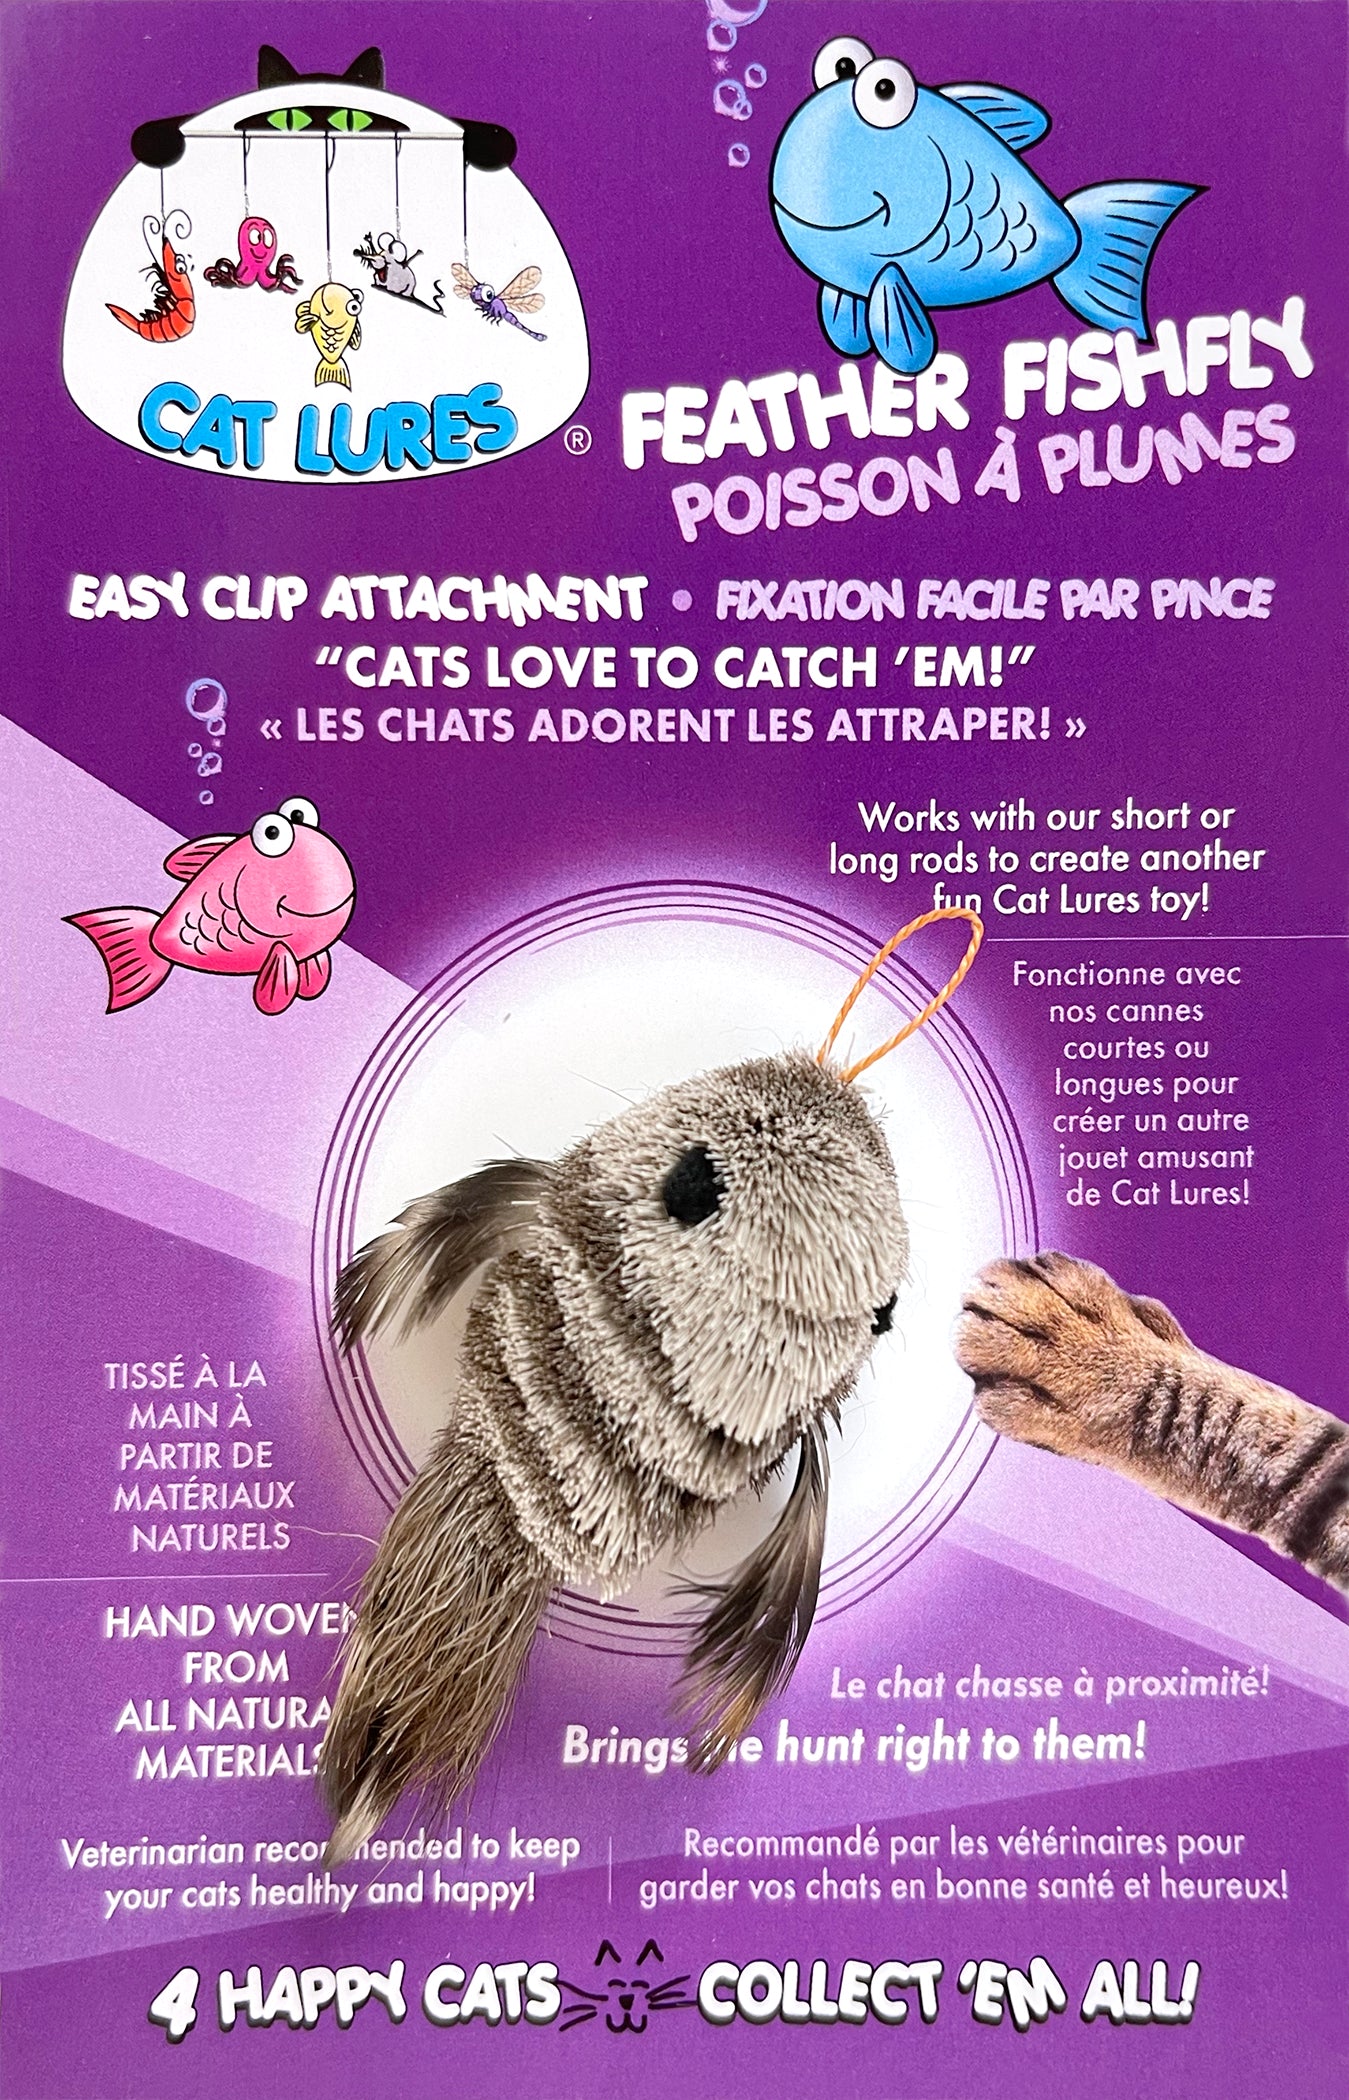 CAT LURES Feather Fishfly Attachment